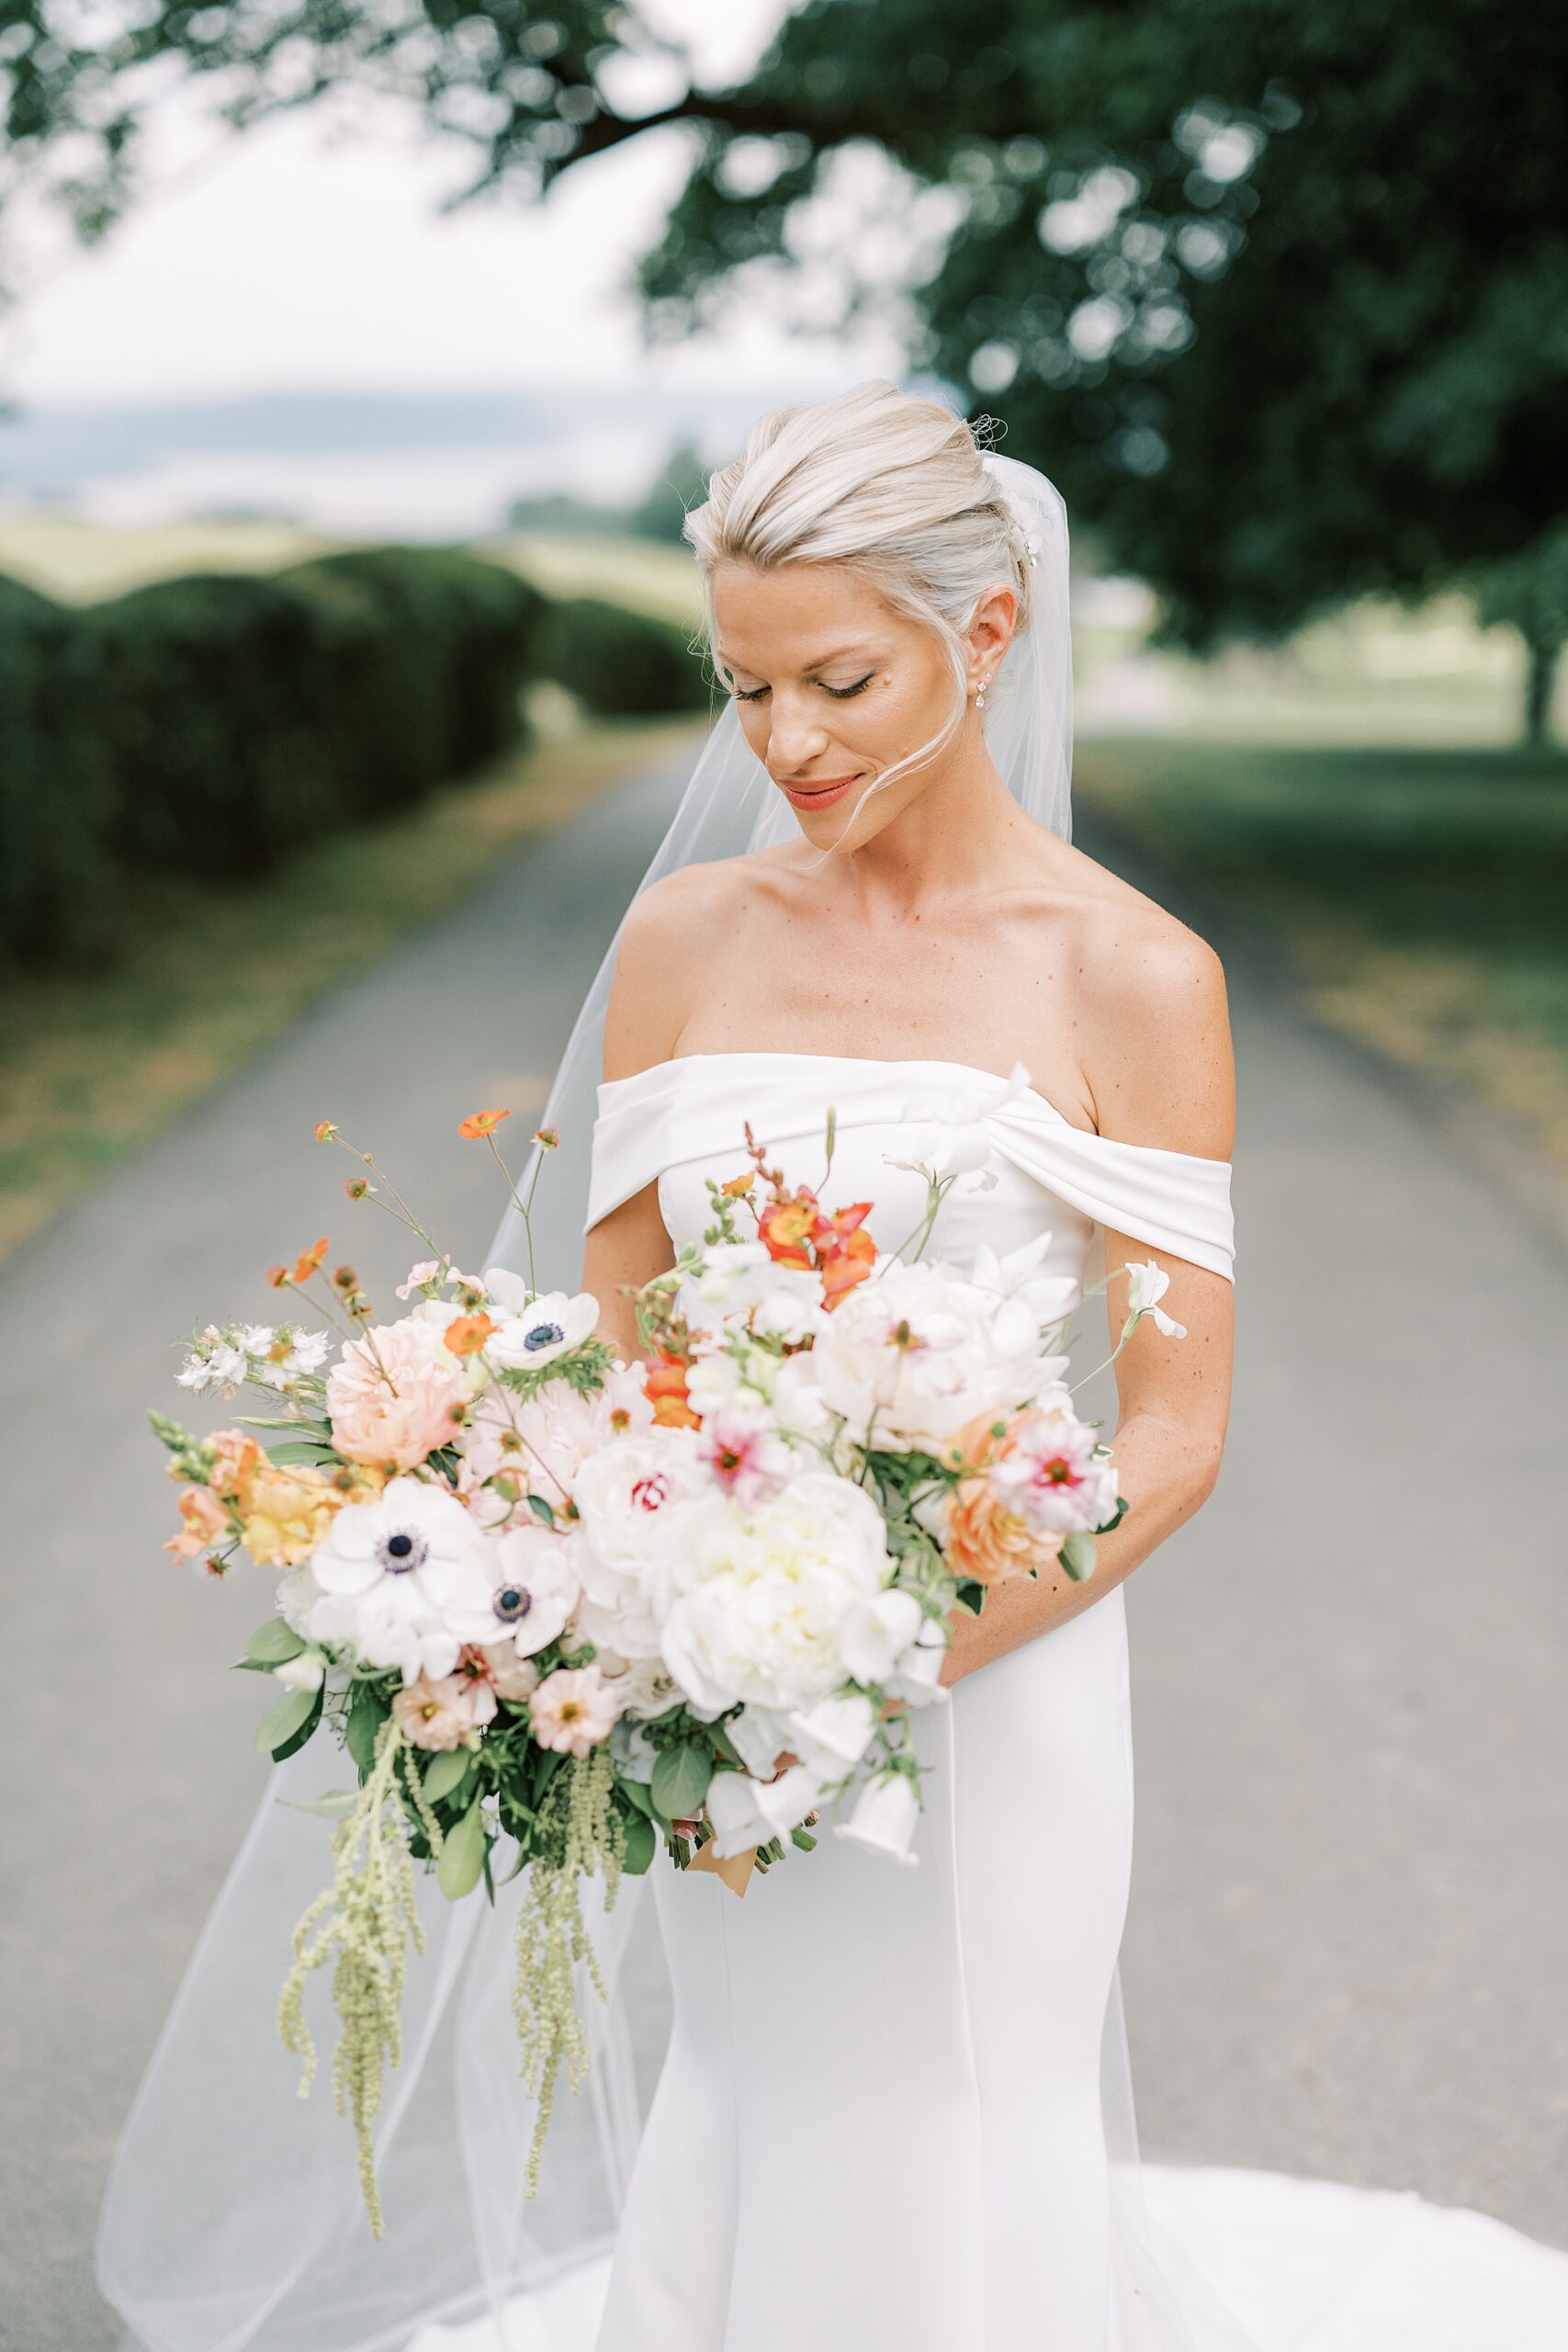 blonde bride in off-the-shoulder gown looks down at pastel bouquet